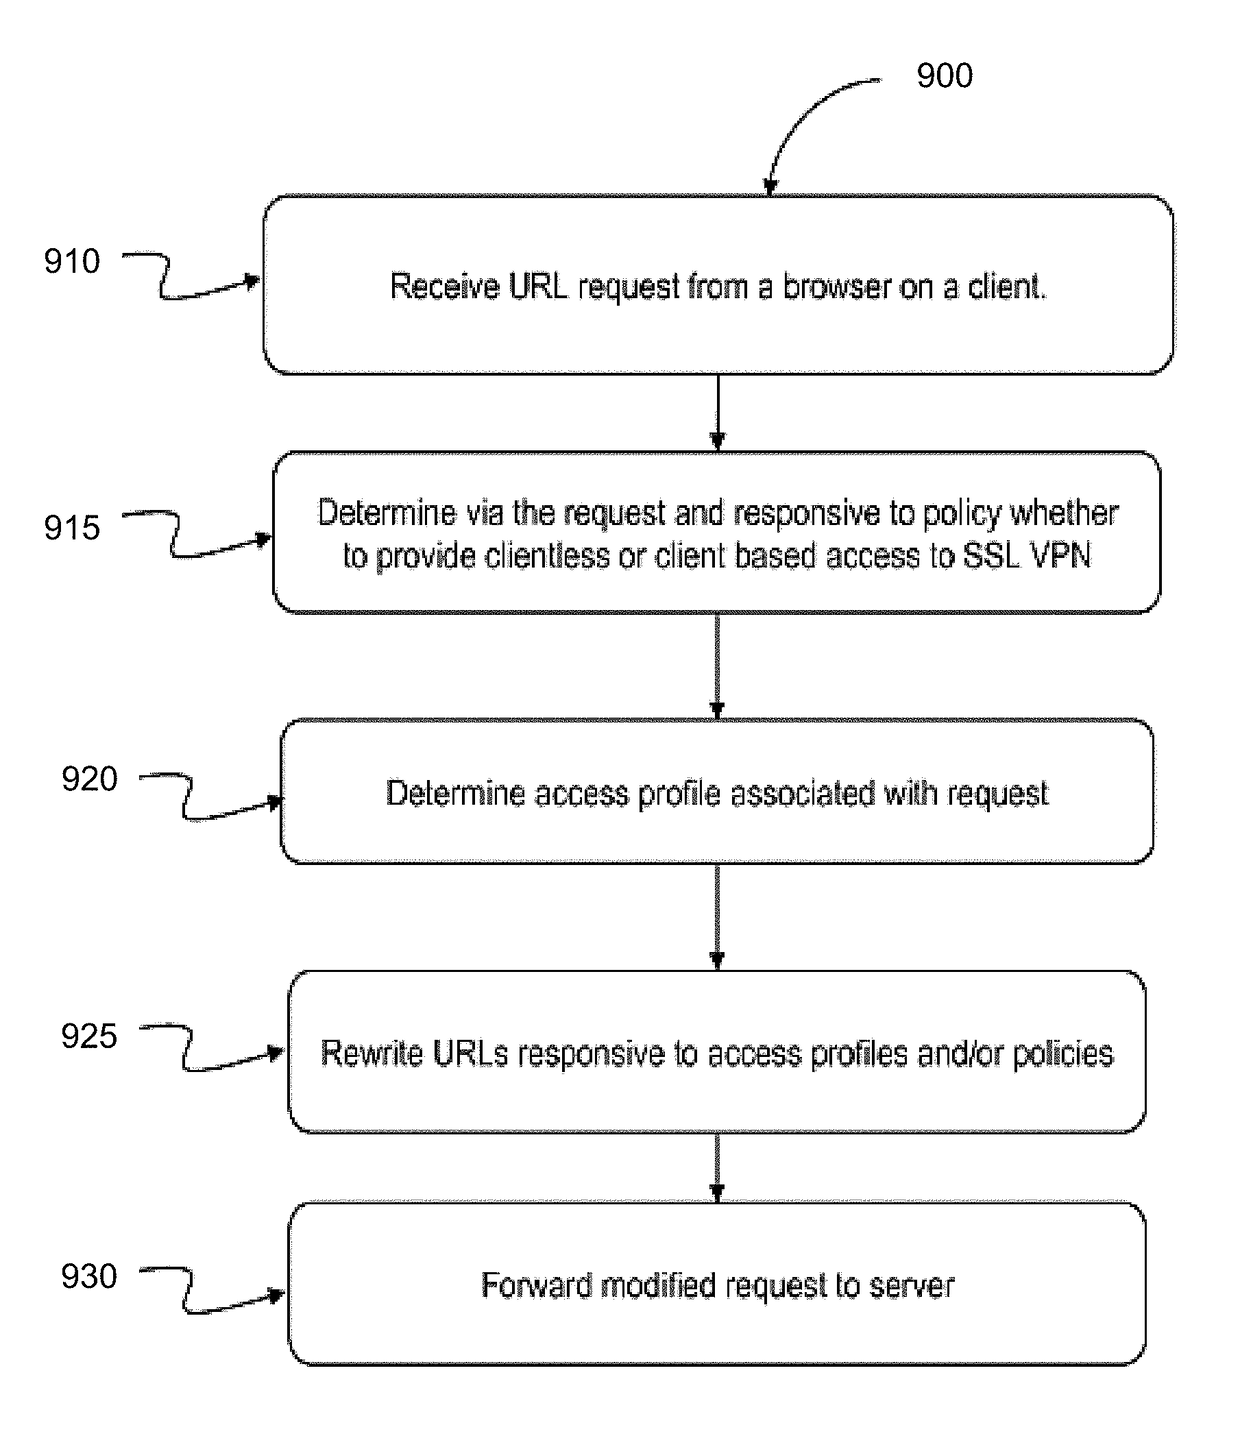 Systems and methods for a unique mechanism of providing 'clientless sslvpn' access to a variety of web-applications through a sslvpn gateway